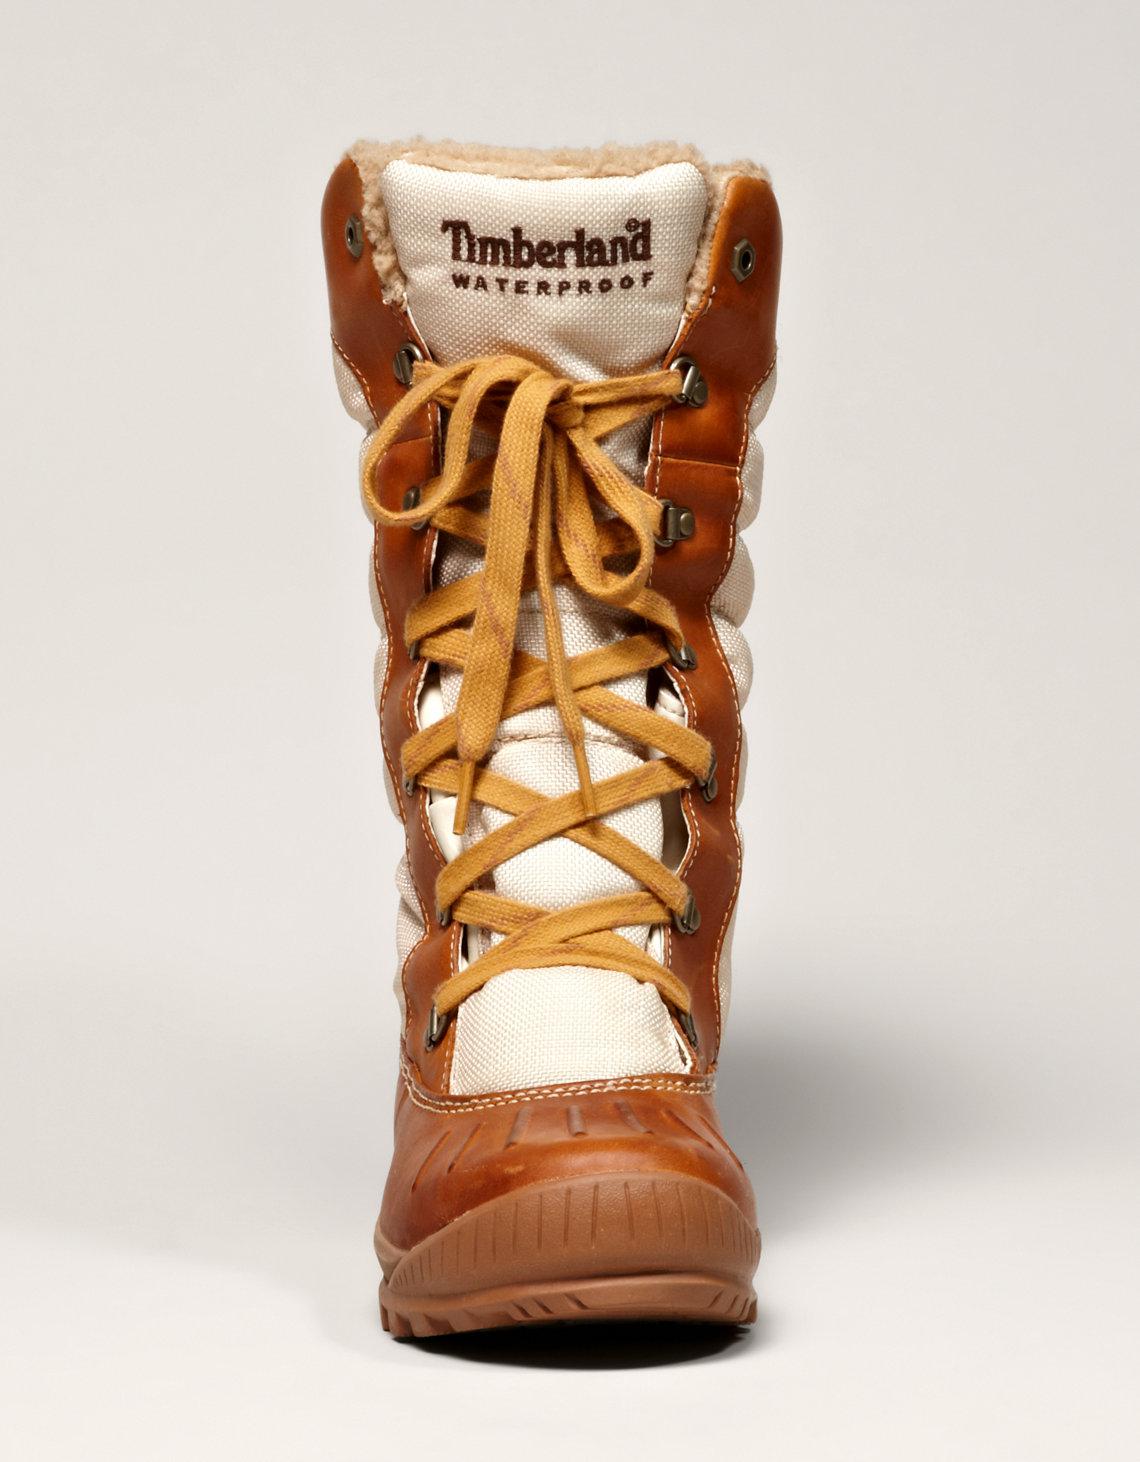 timberland mount holly waterproof women's boots